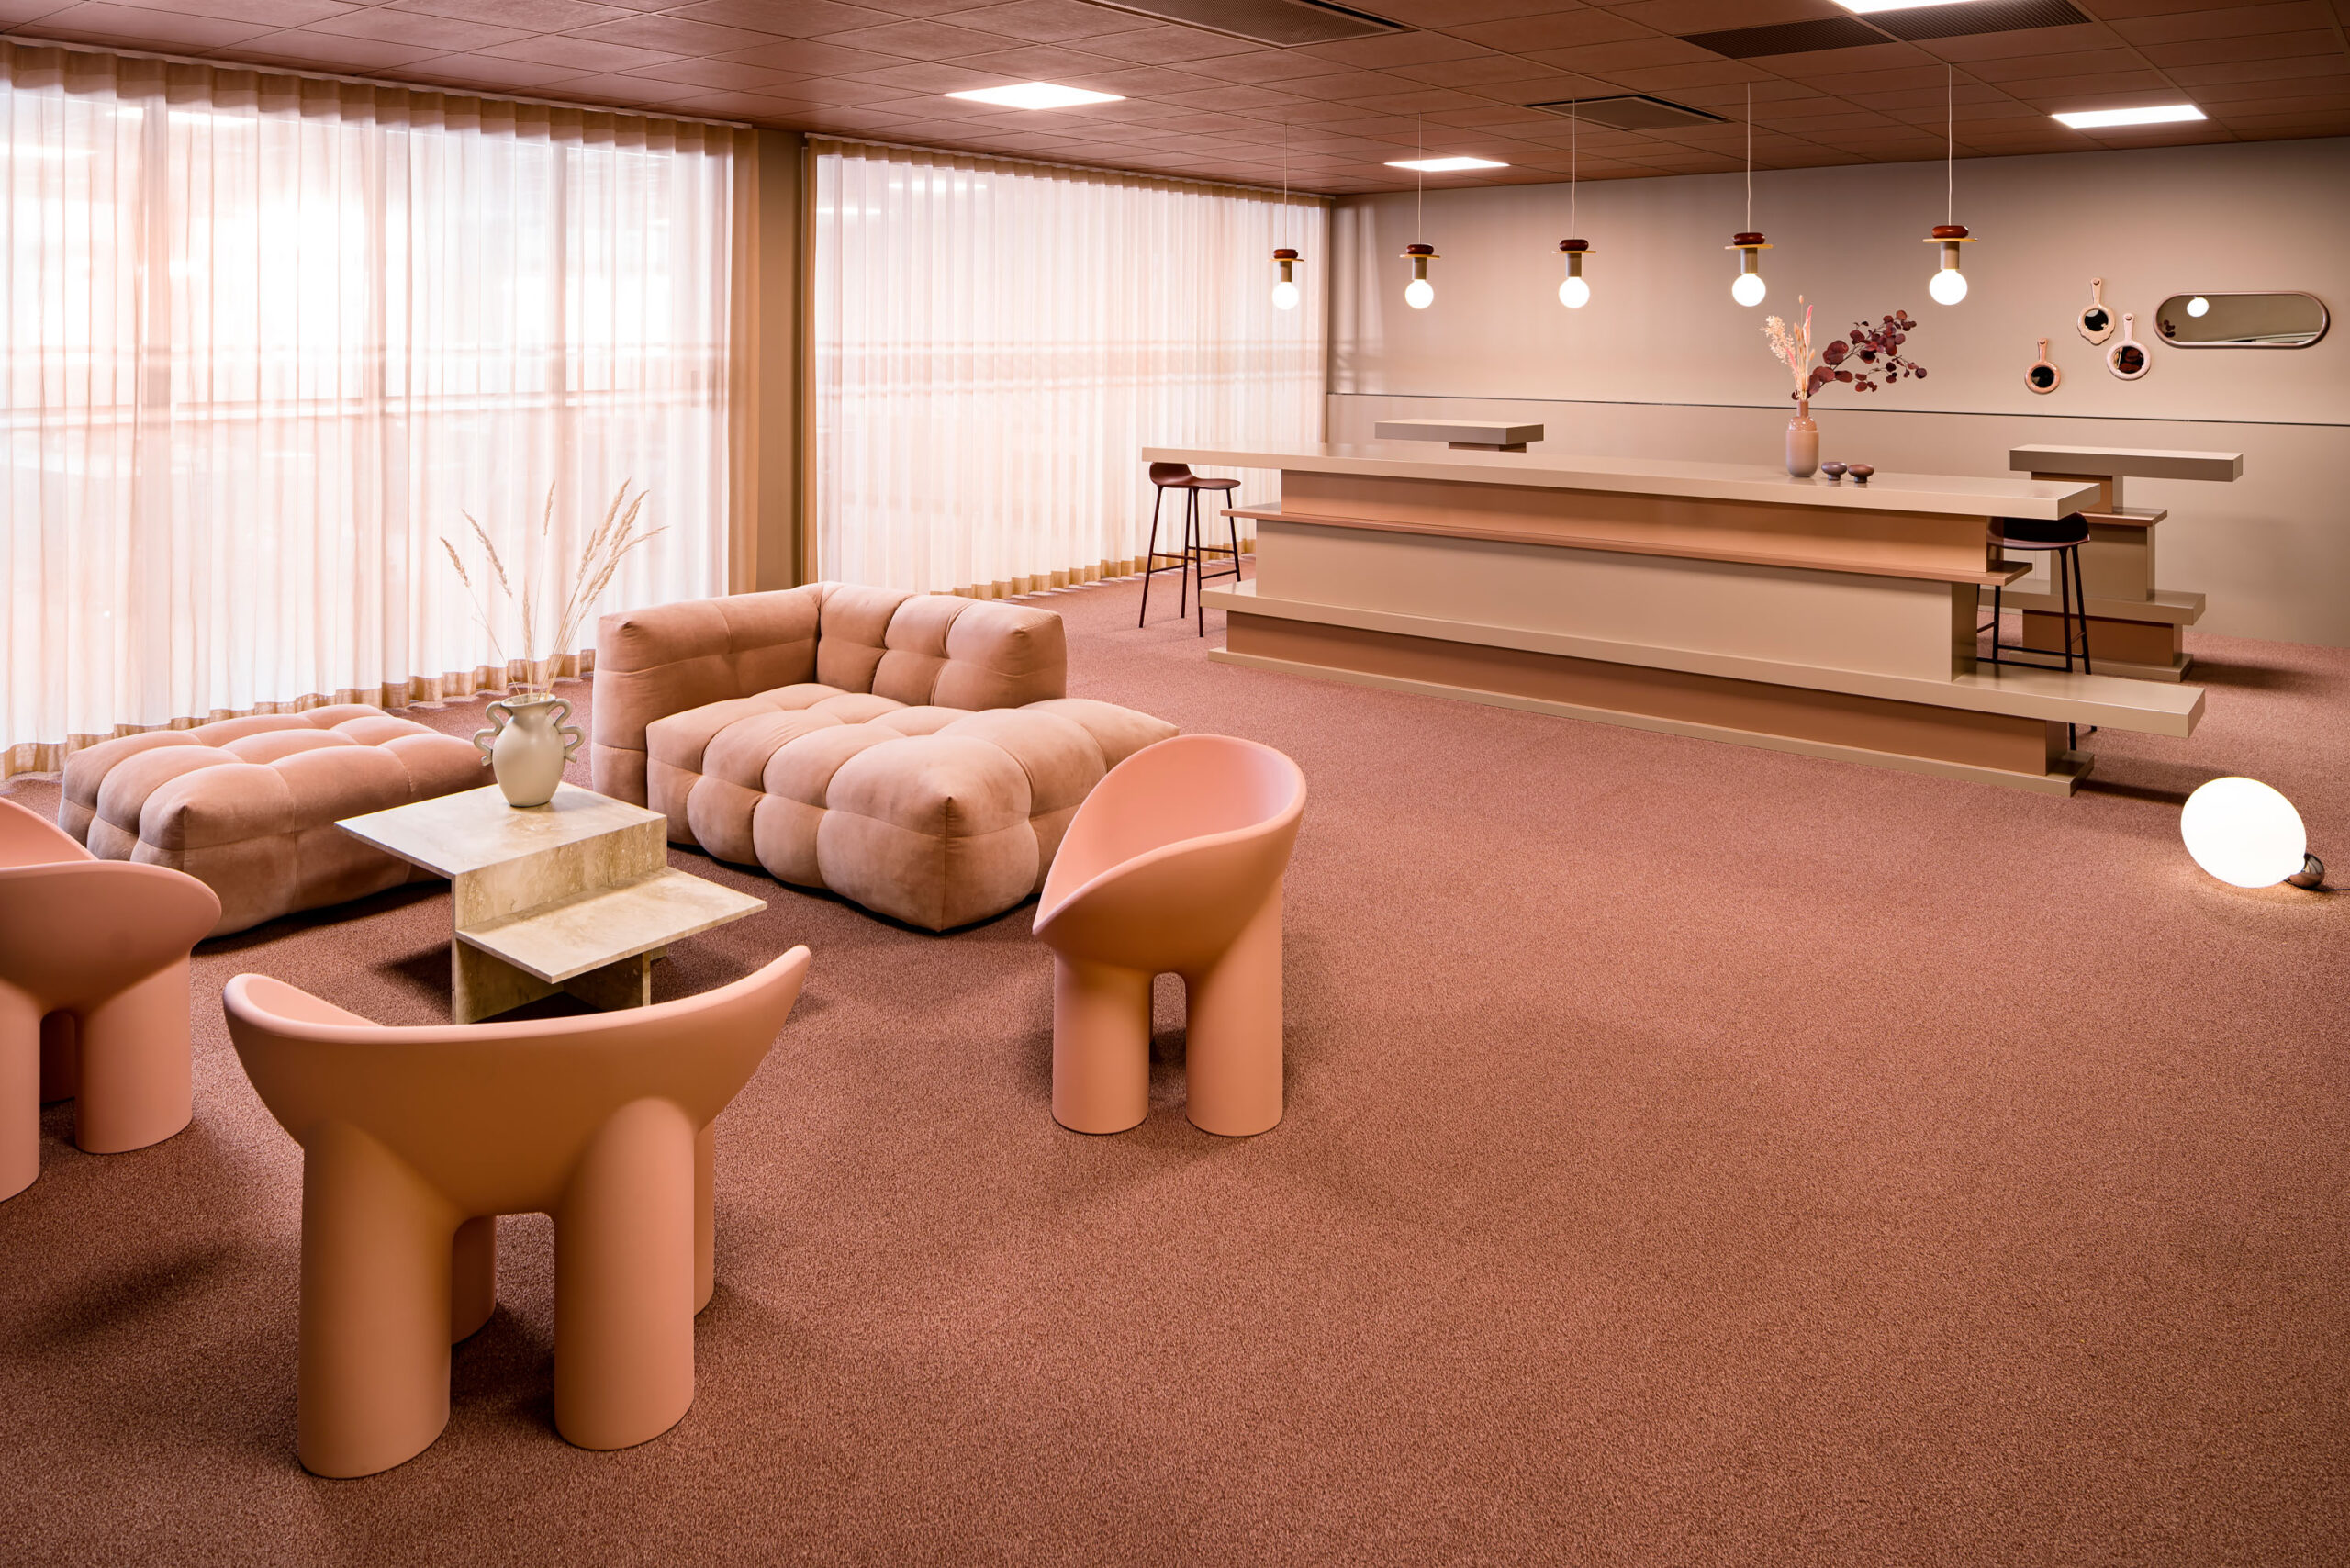 Interior design concept for an office with pink and beige as the main colors. A cozy lounge area with three Roly Poly chairs from Studio Pomone and a Canapé Kendall sofa, a standalone divan from Mogihome in a pink color. Distinct coffee table from Danish brand Ferm Living, made of travertine. Custom-designed bar counter in varying shades of beige and pink.